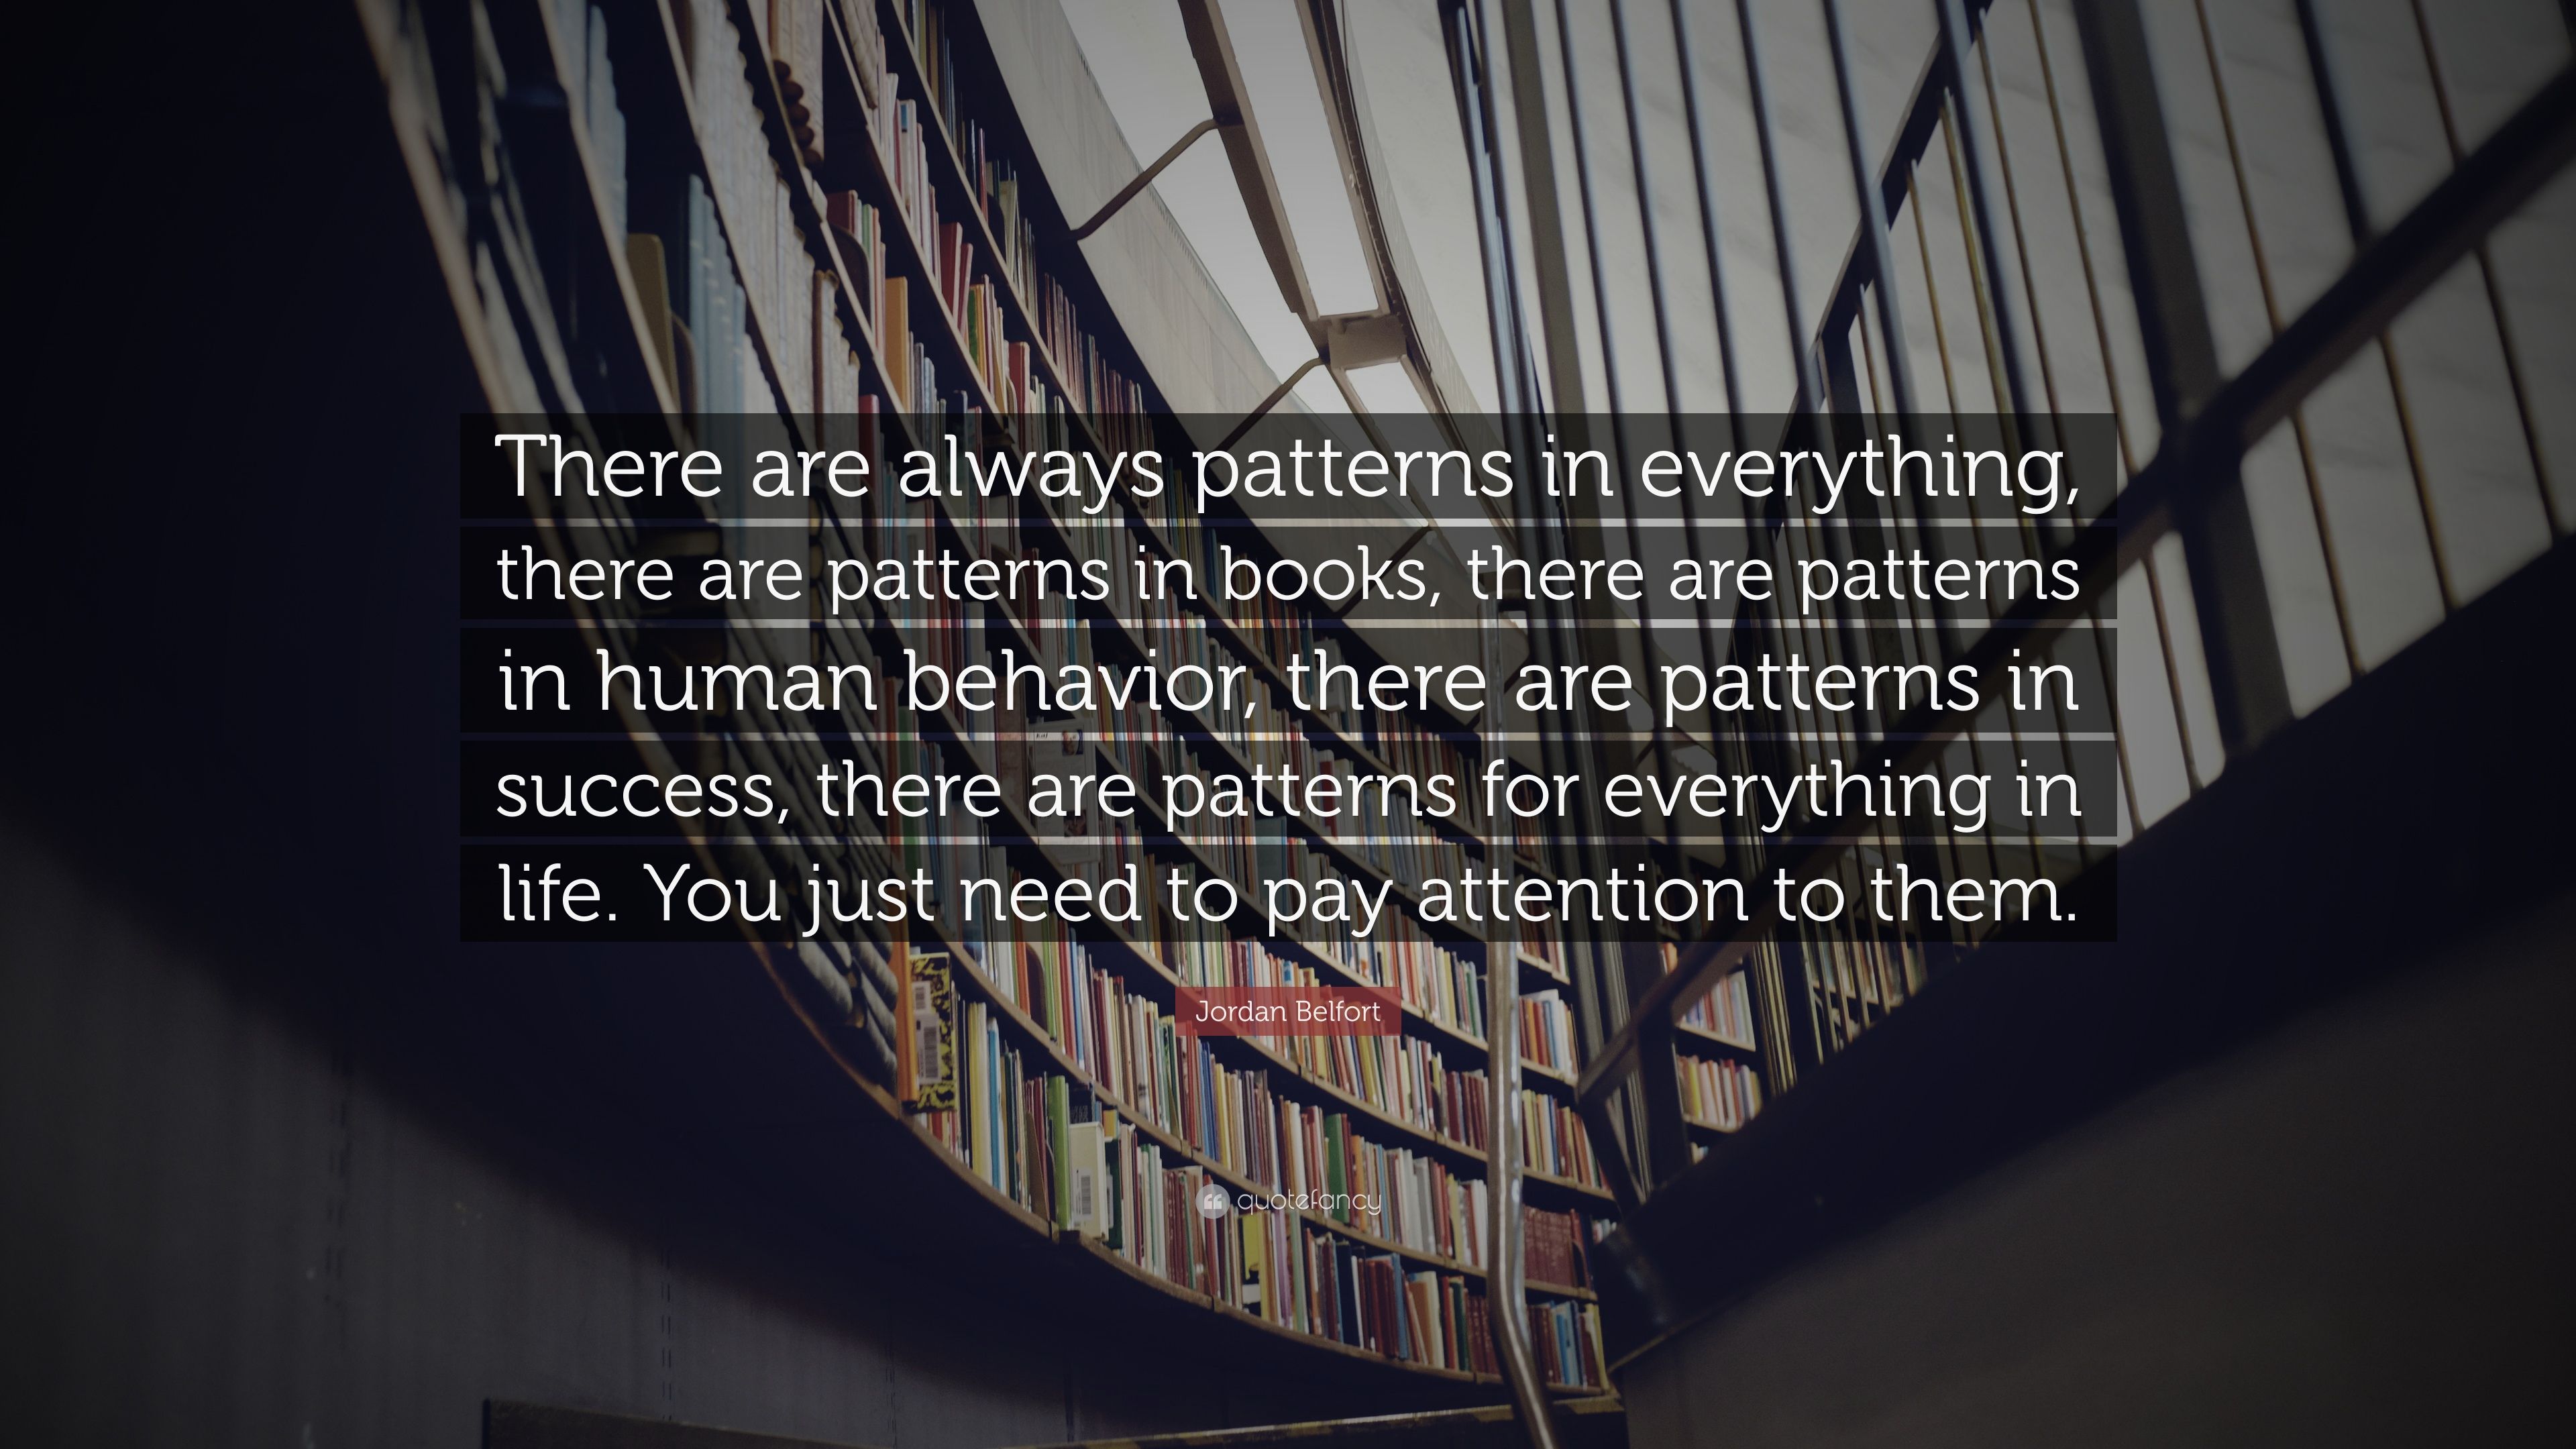 Jordan Belfort Quote: “There are always patterns in everything, there are patterns in books, there are patterns in human behavior, there are pa.” (10 wallpaper)